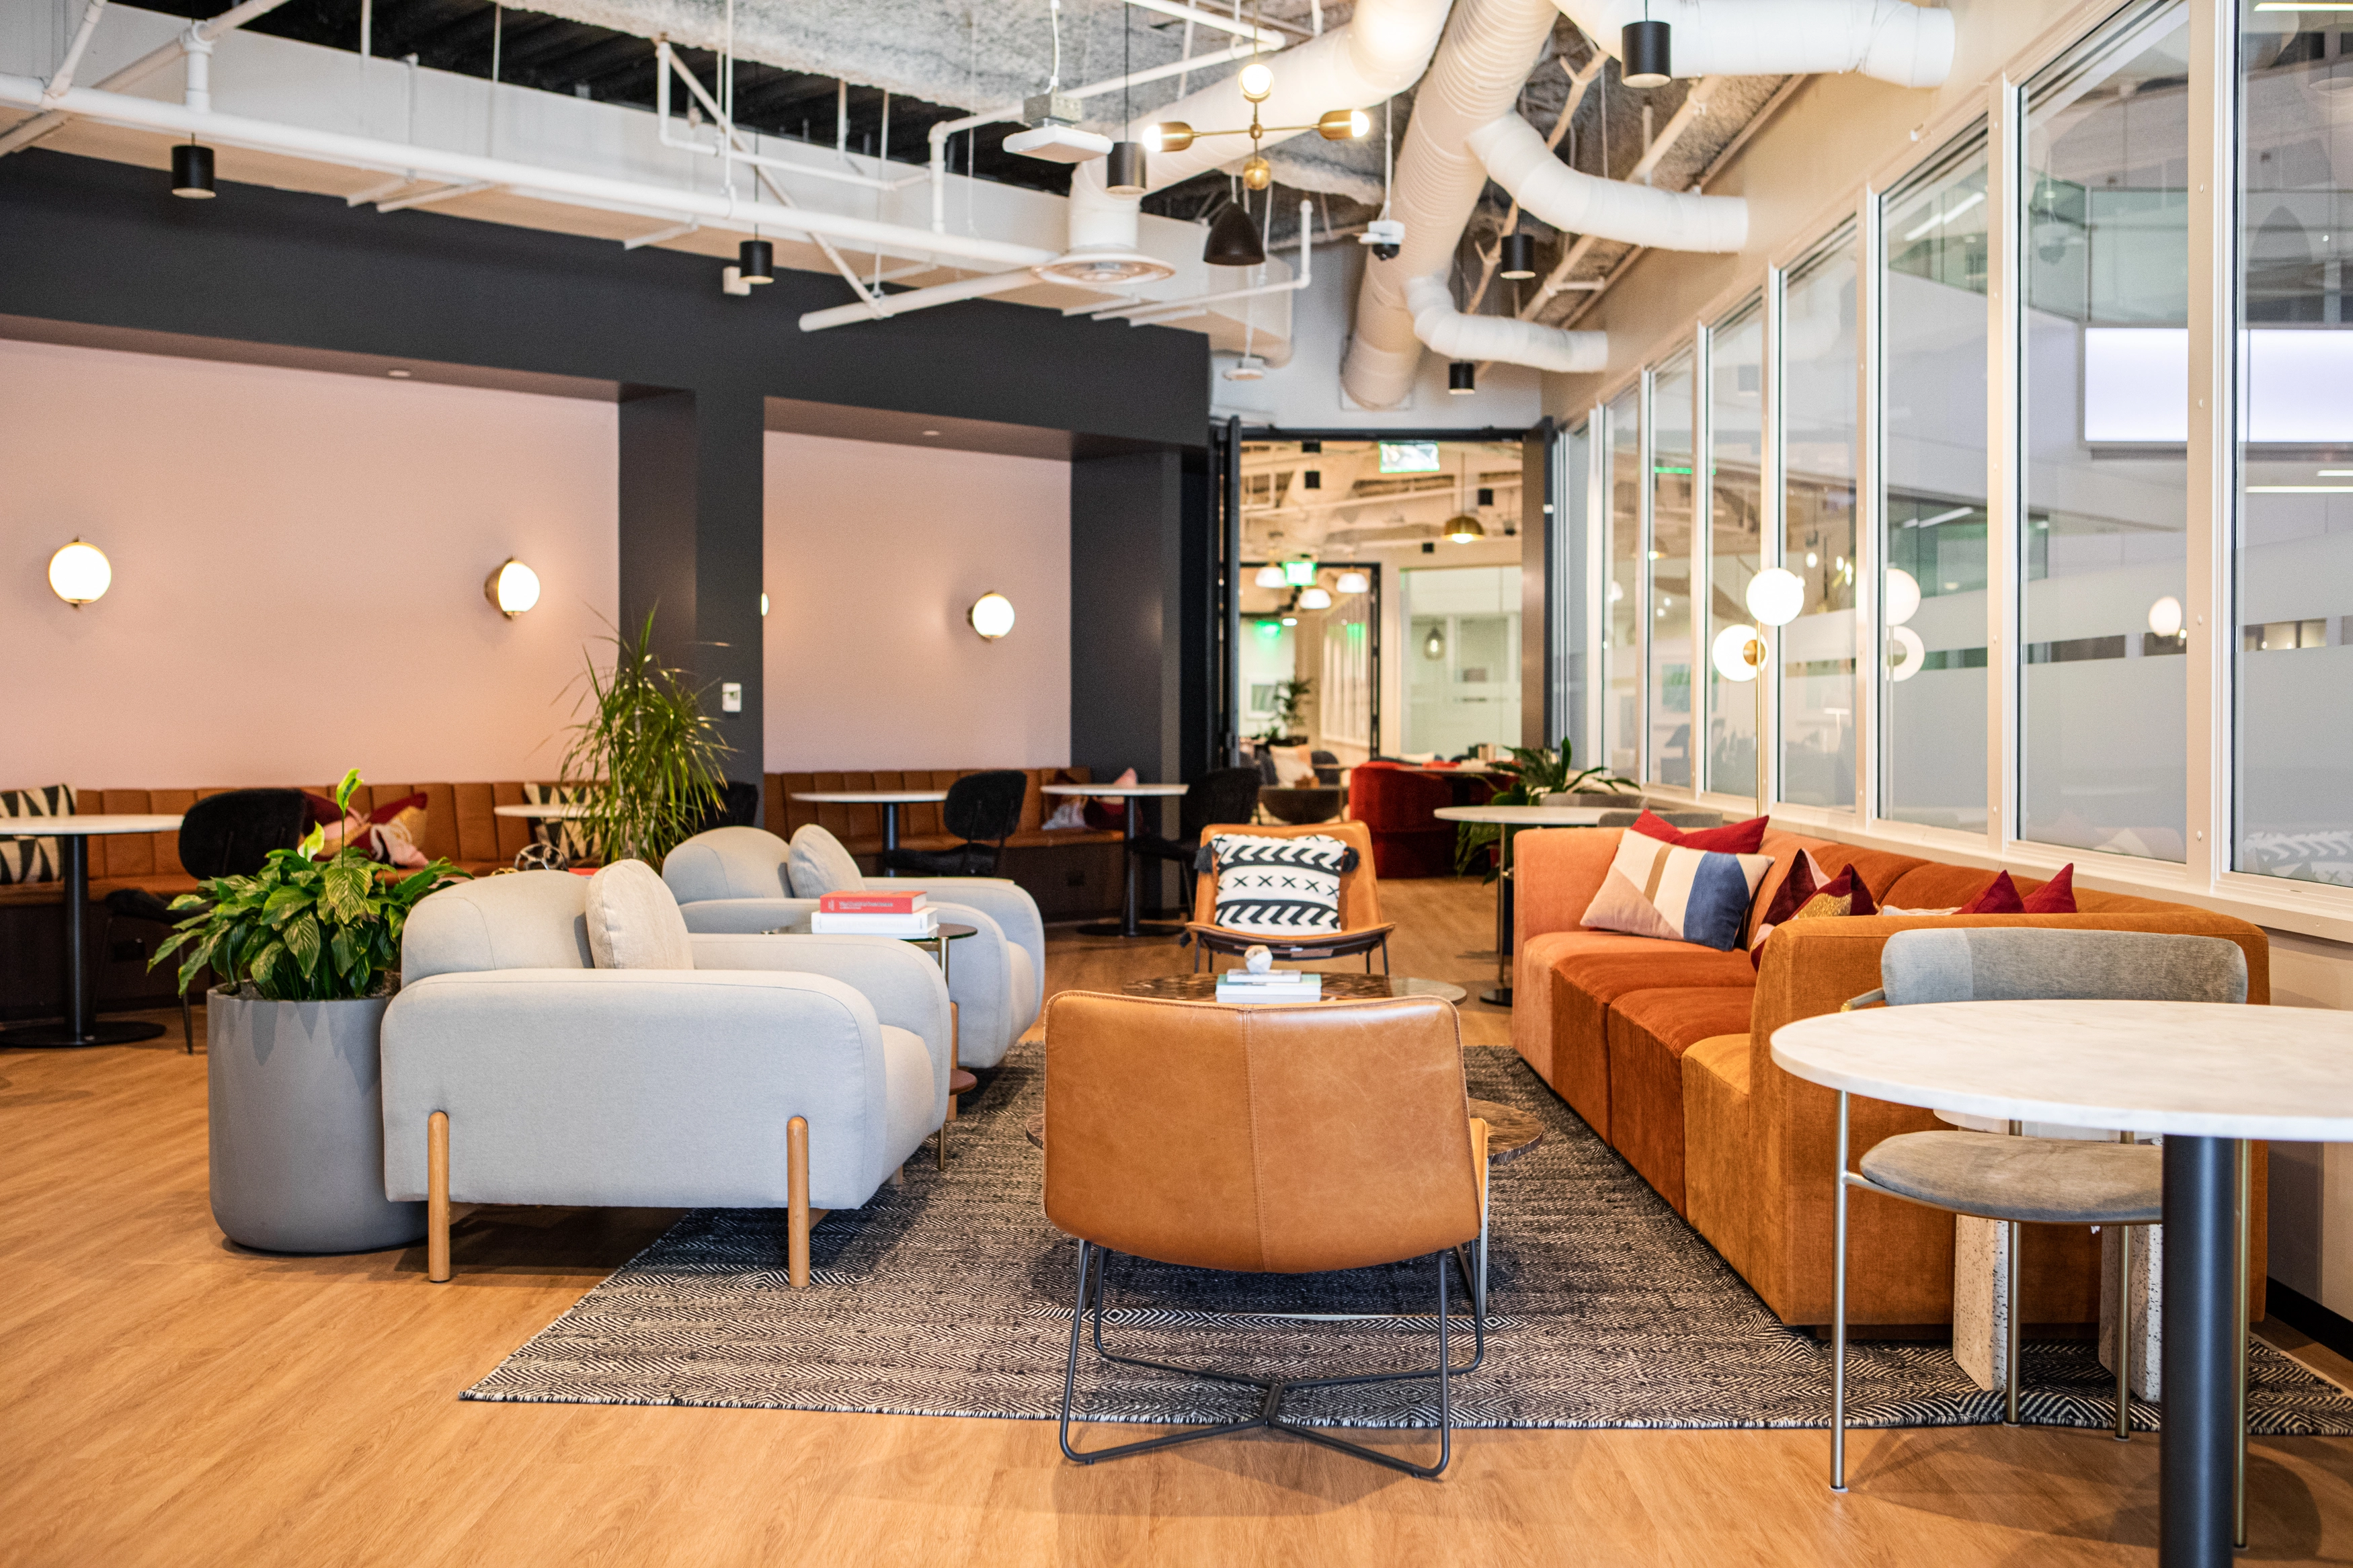 Coworking Company Industrious to Open Two San Diego Locations - San Diego  Business Journal